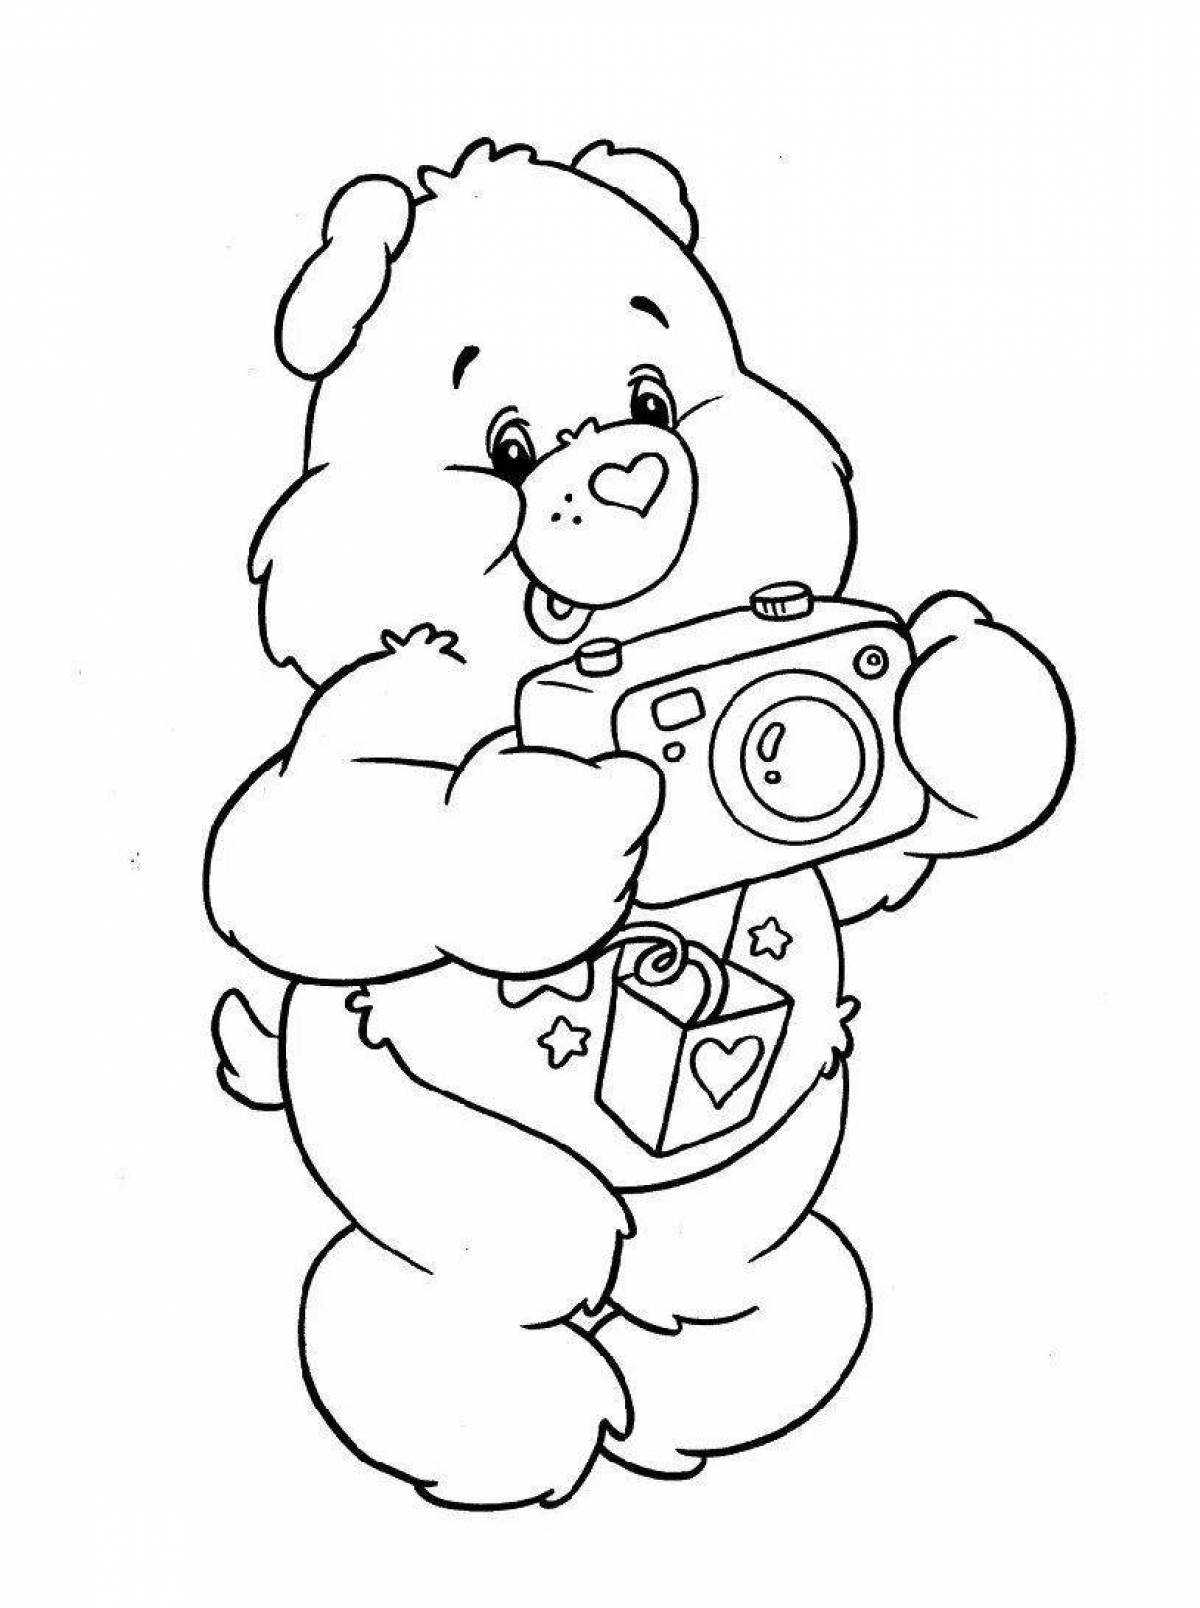 Colorful teddy bear coloring book